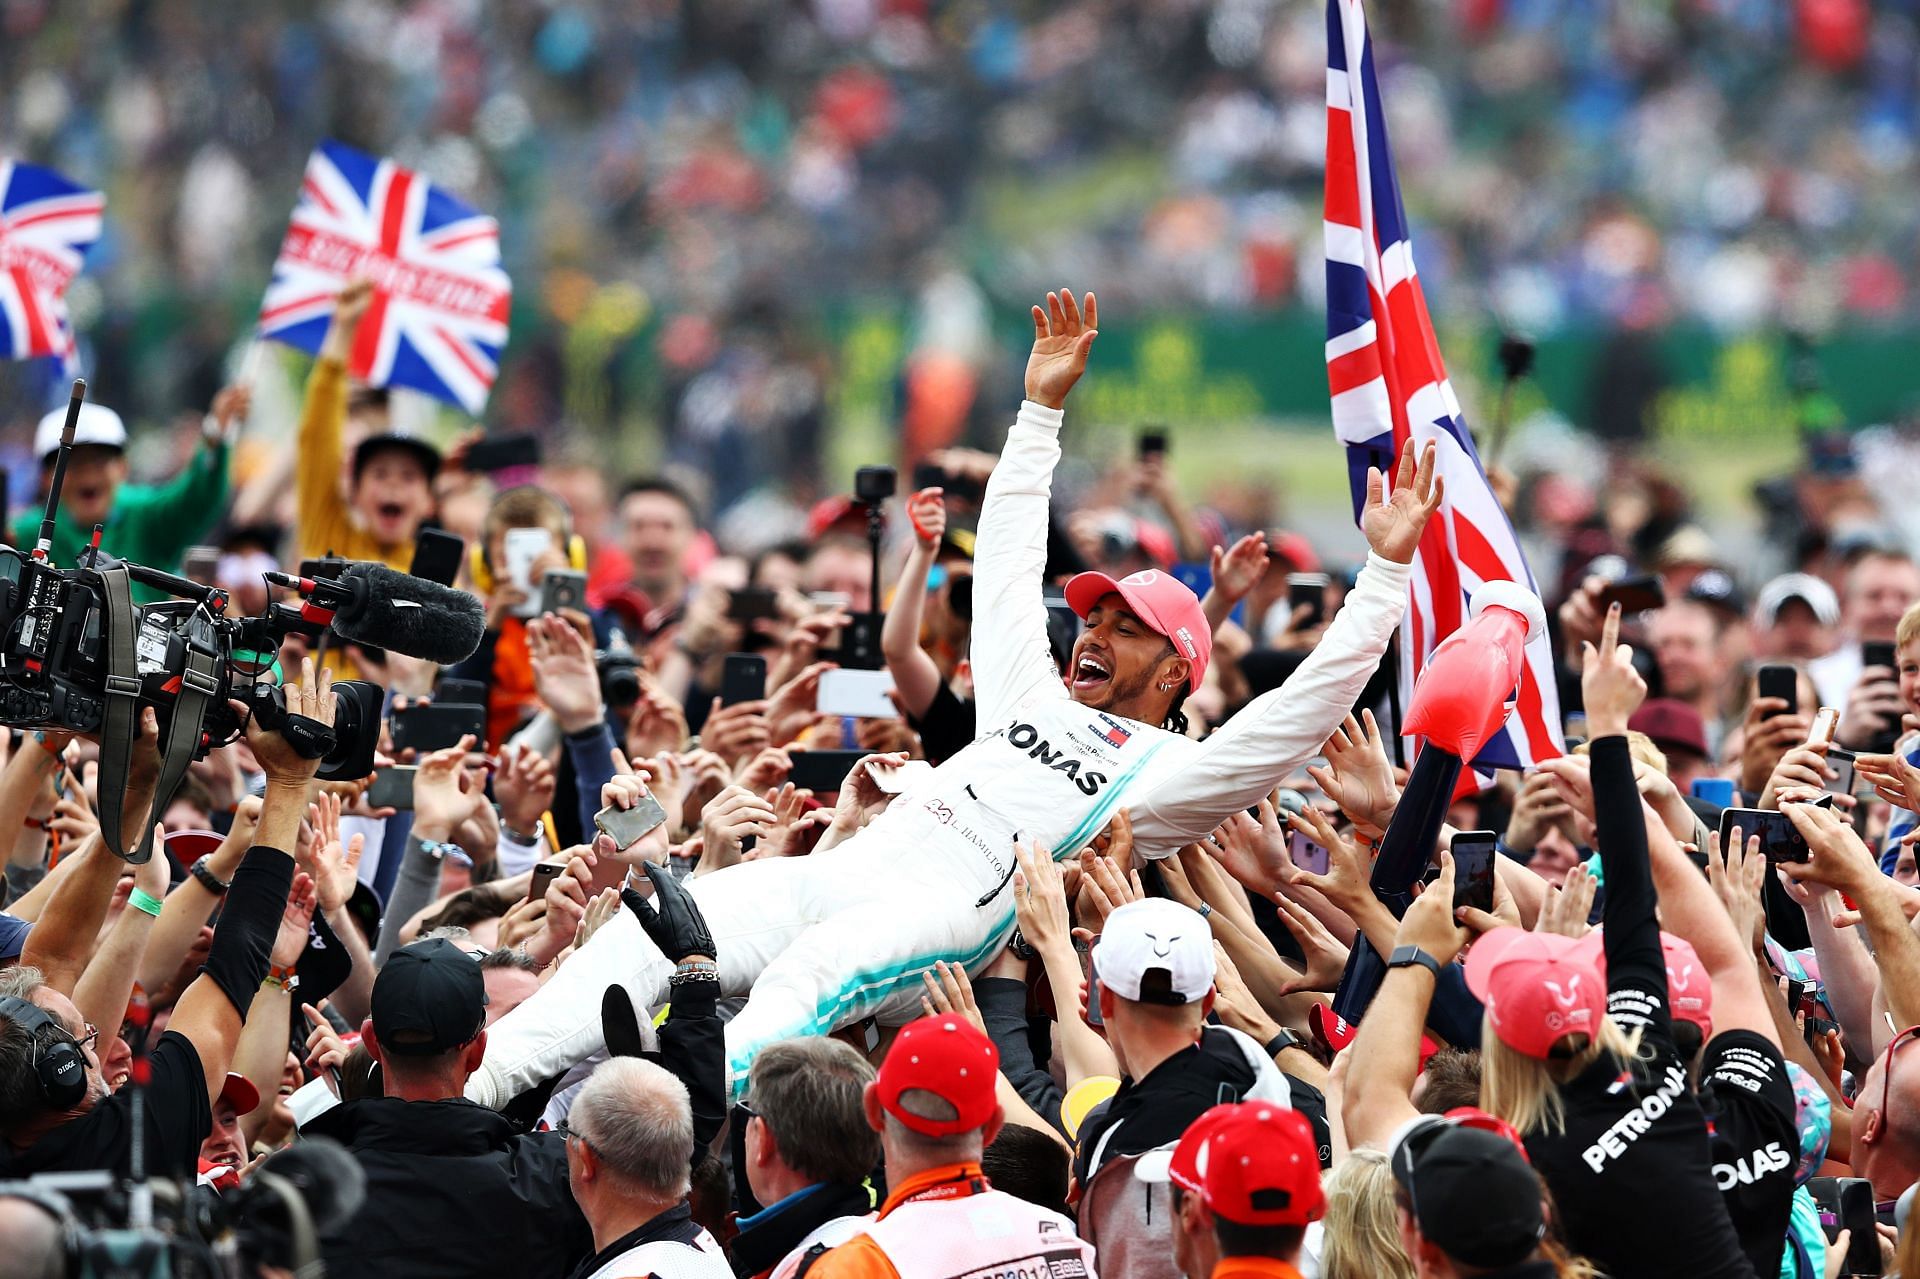 Lewis Hamilton celebrating his win at Silverstone in 2019 (Photo by Mark Thompson/Getty Images)